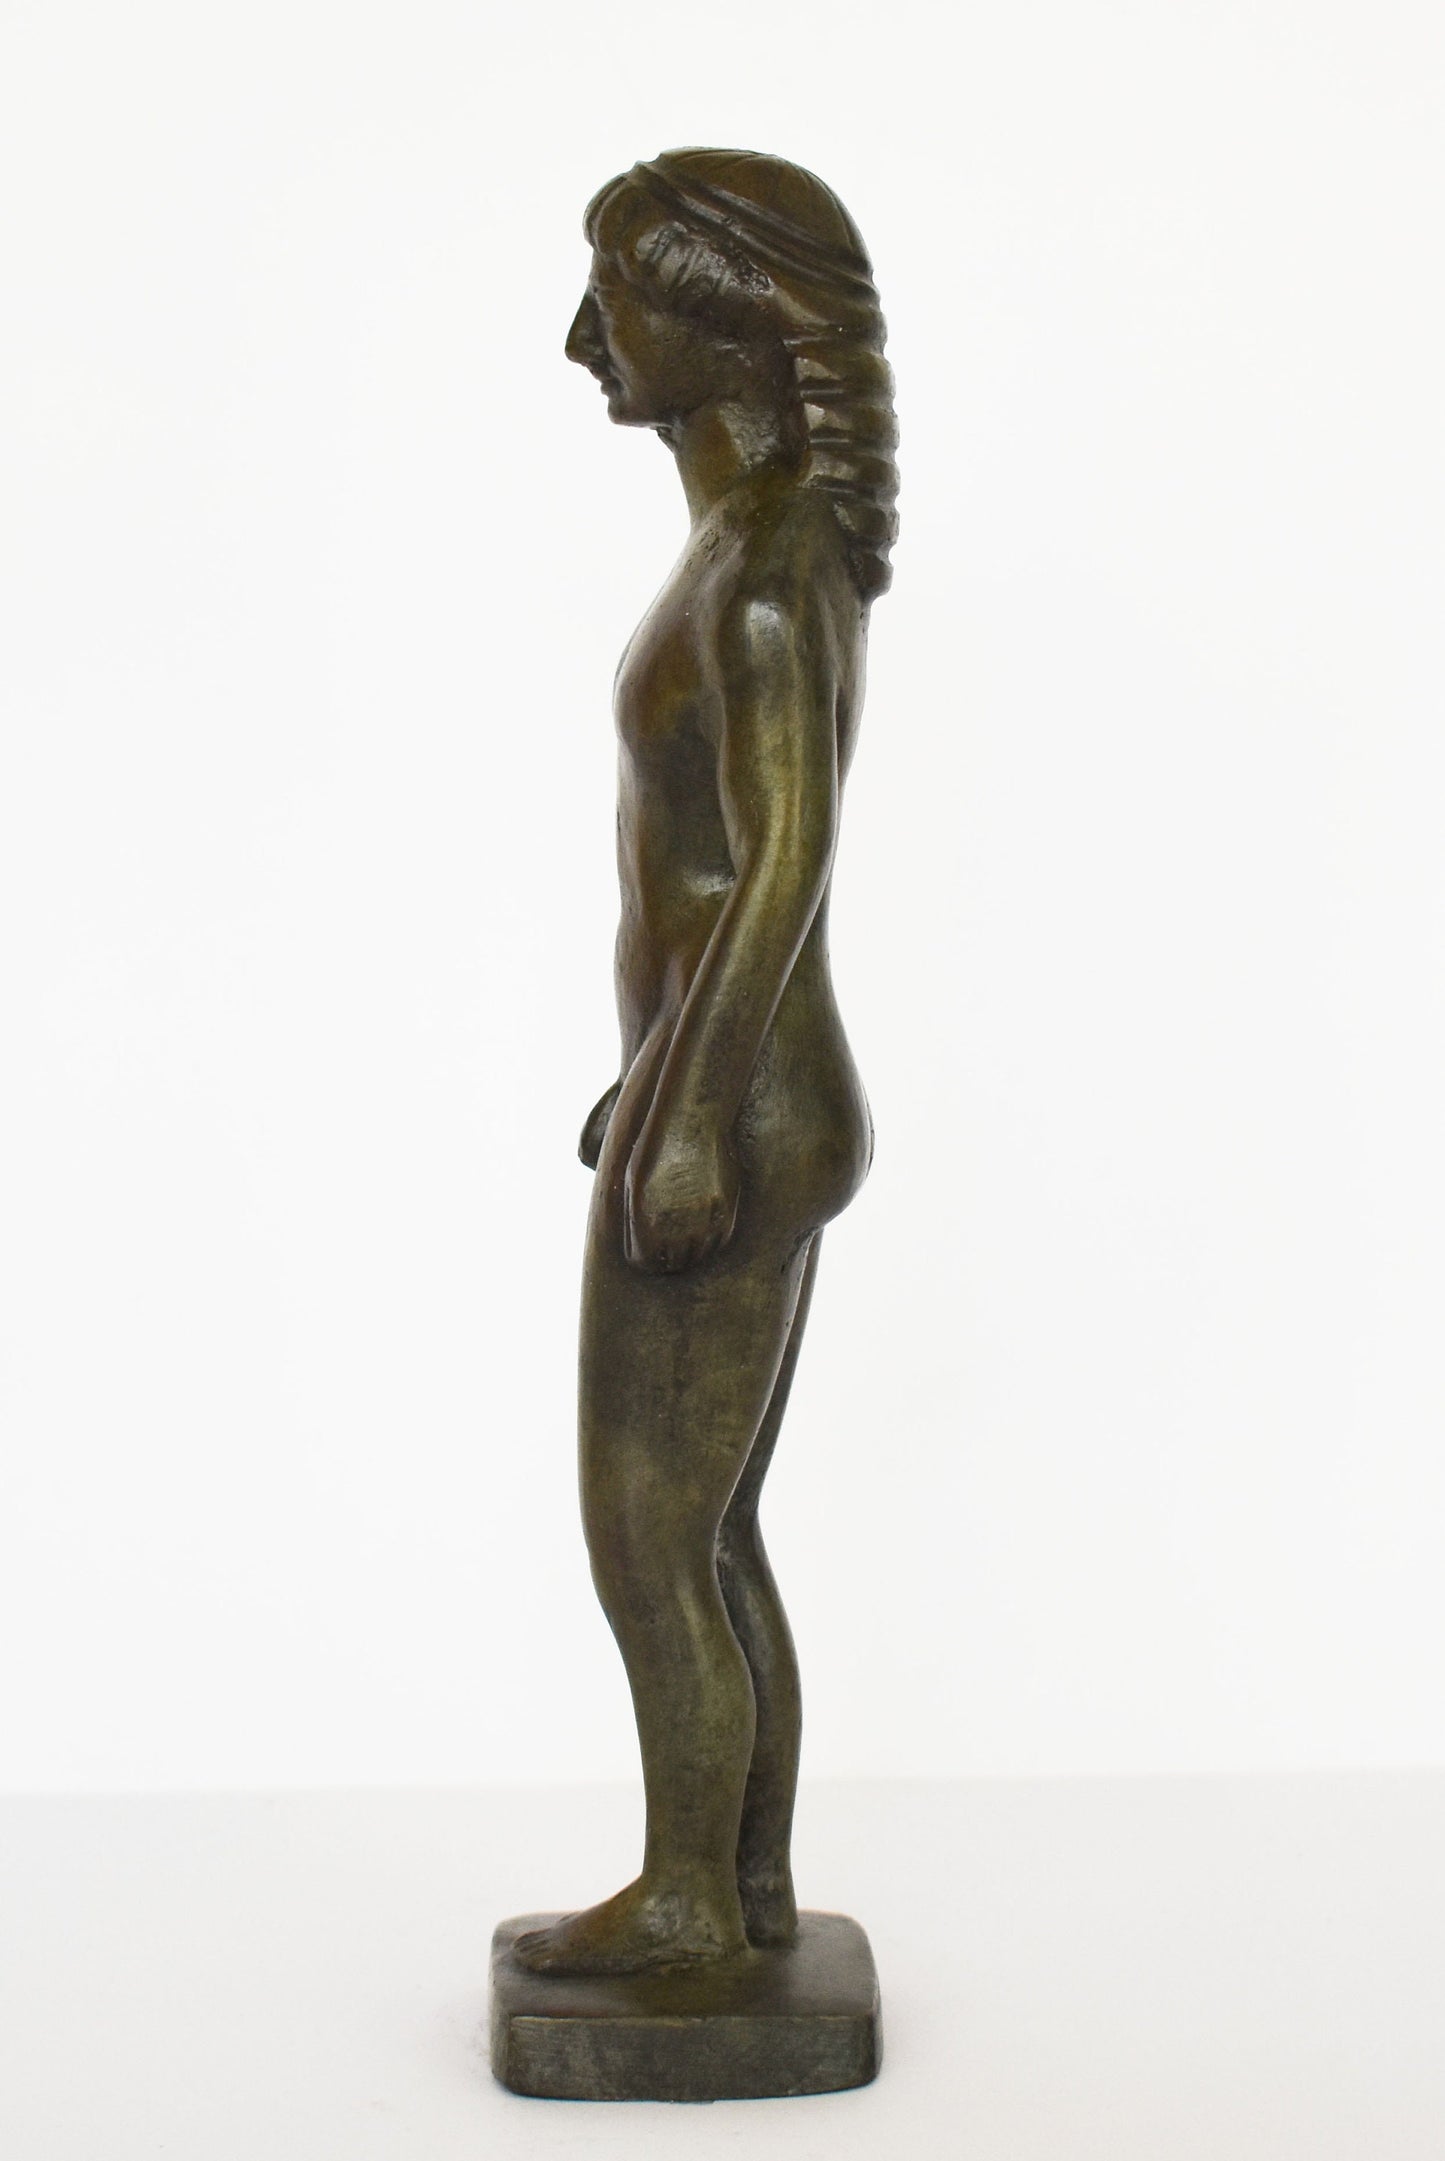 Kouros - Nude Male Youth - Free-Standing Ancient Greek Sculpture - Archaic Period - Dedication to the Gods - pure Bronze Sculpture